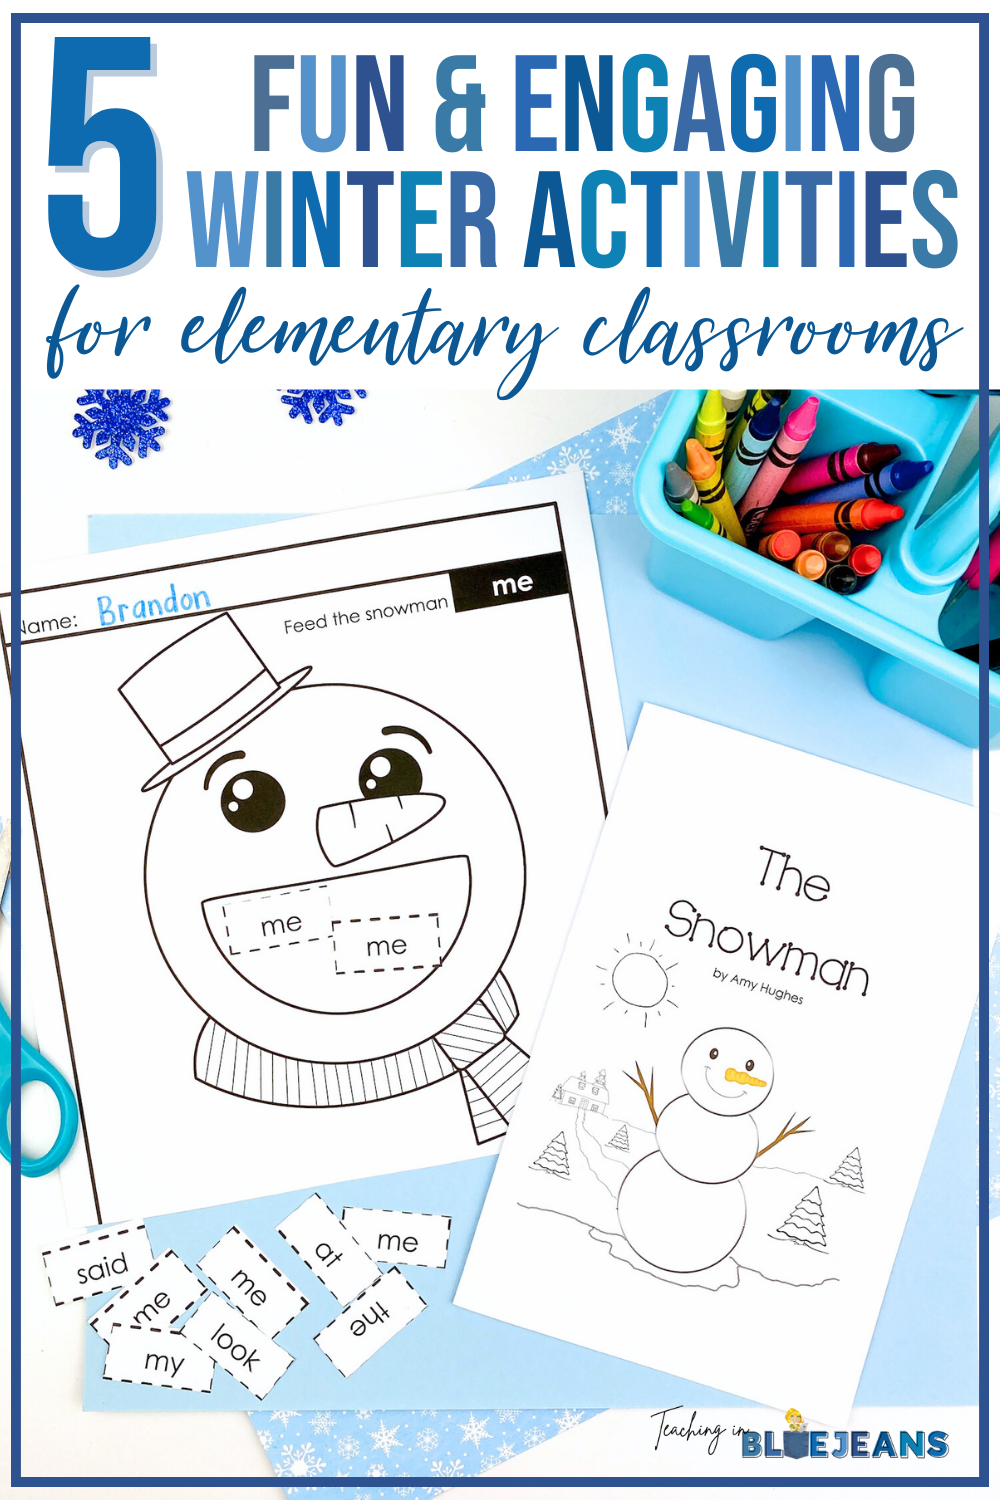 Image saying "5 Fun and Engaging Winter Activities for Elementary Classrooms" and featuring snowman themed sight word activities.